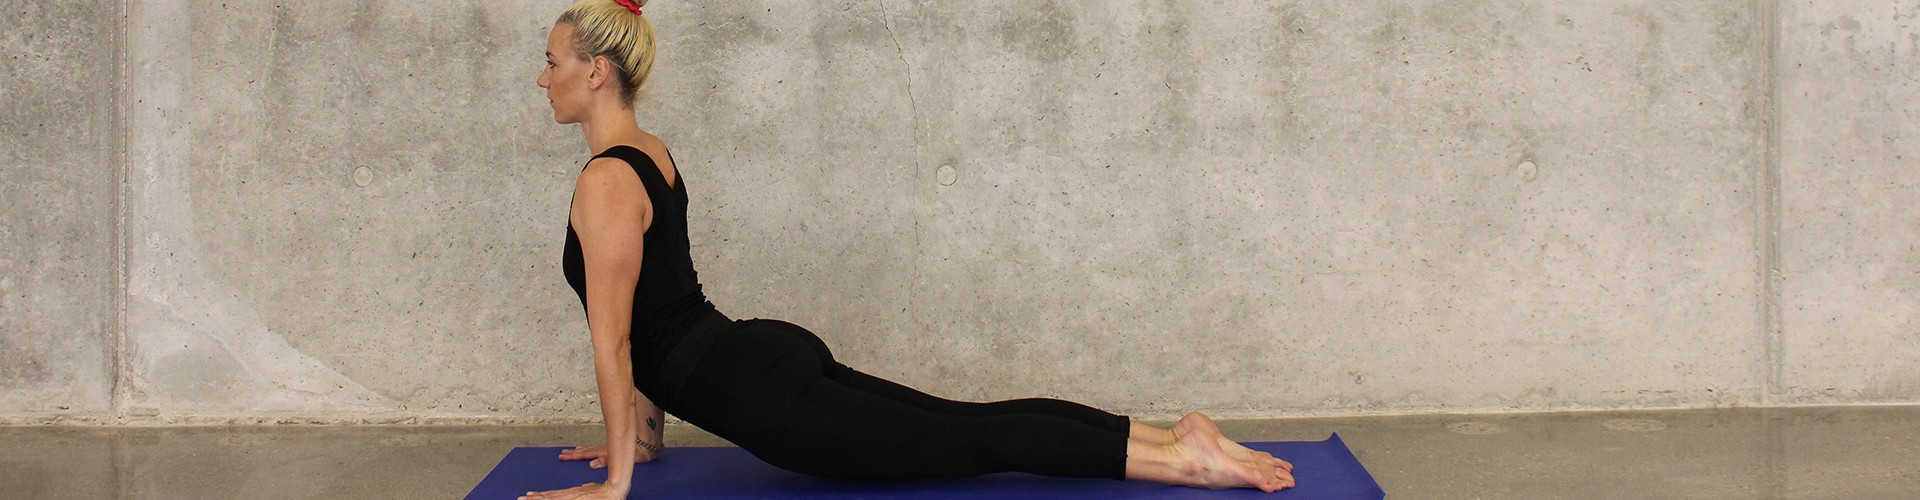 person doing a yoga pose